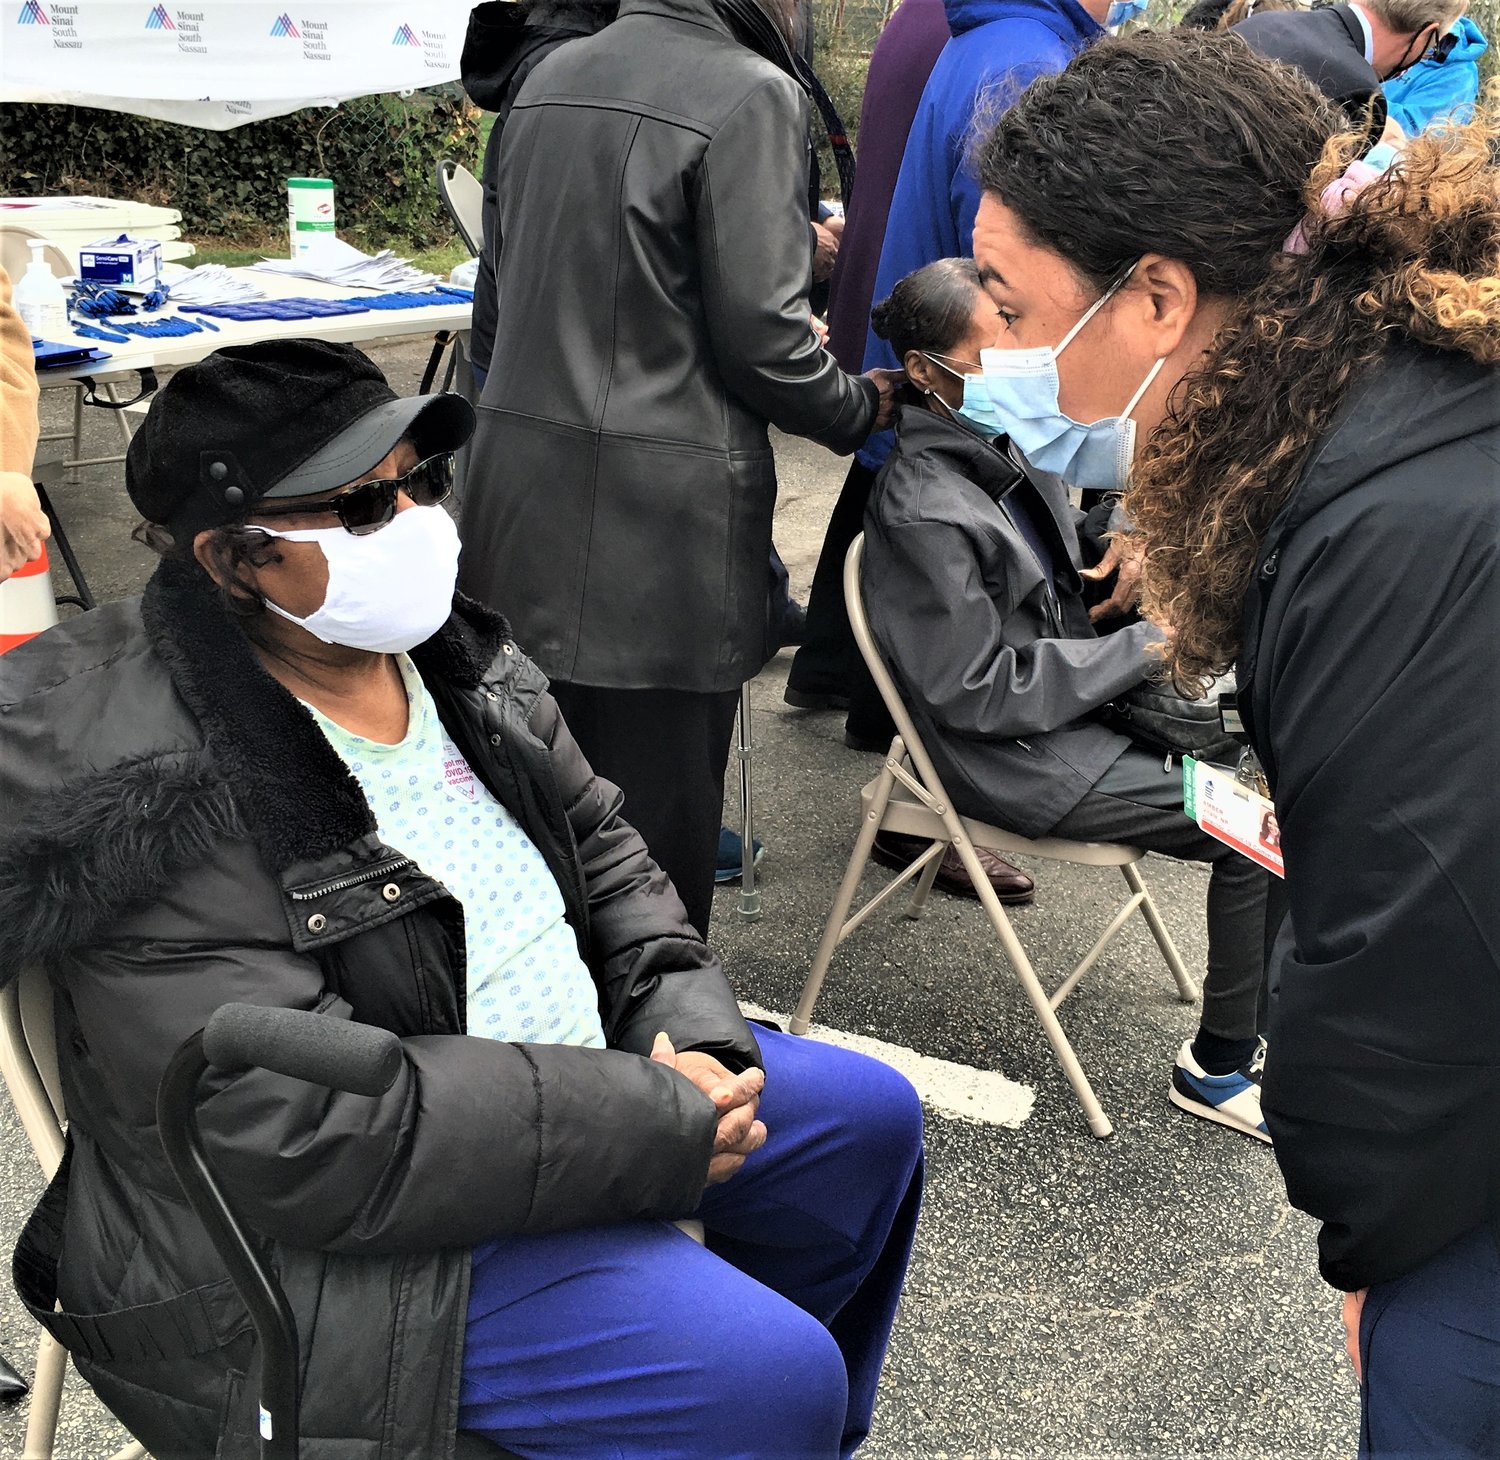 After her vaccination, Elizabeth Haggood, of Uniondale, received instructions from Amber Vitale, director of the Pandemic Department at Mount Sinai South Nassau.